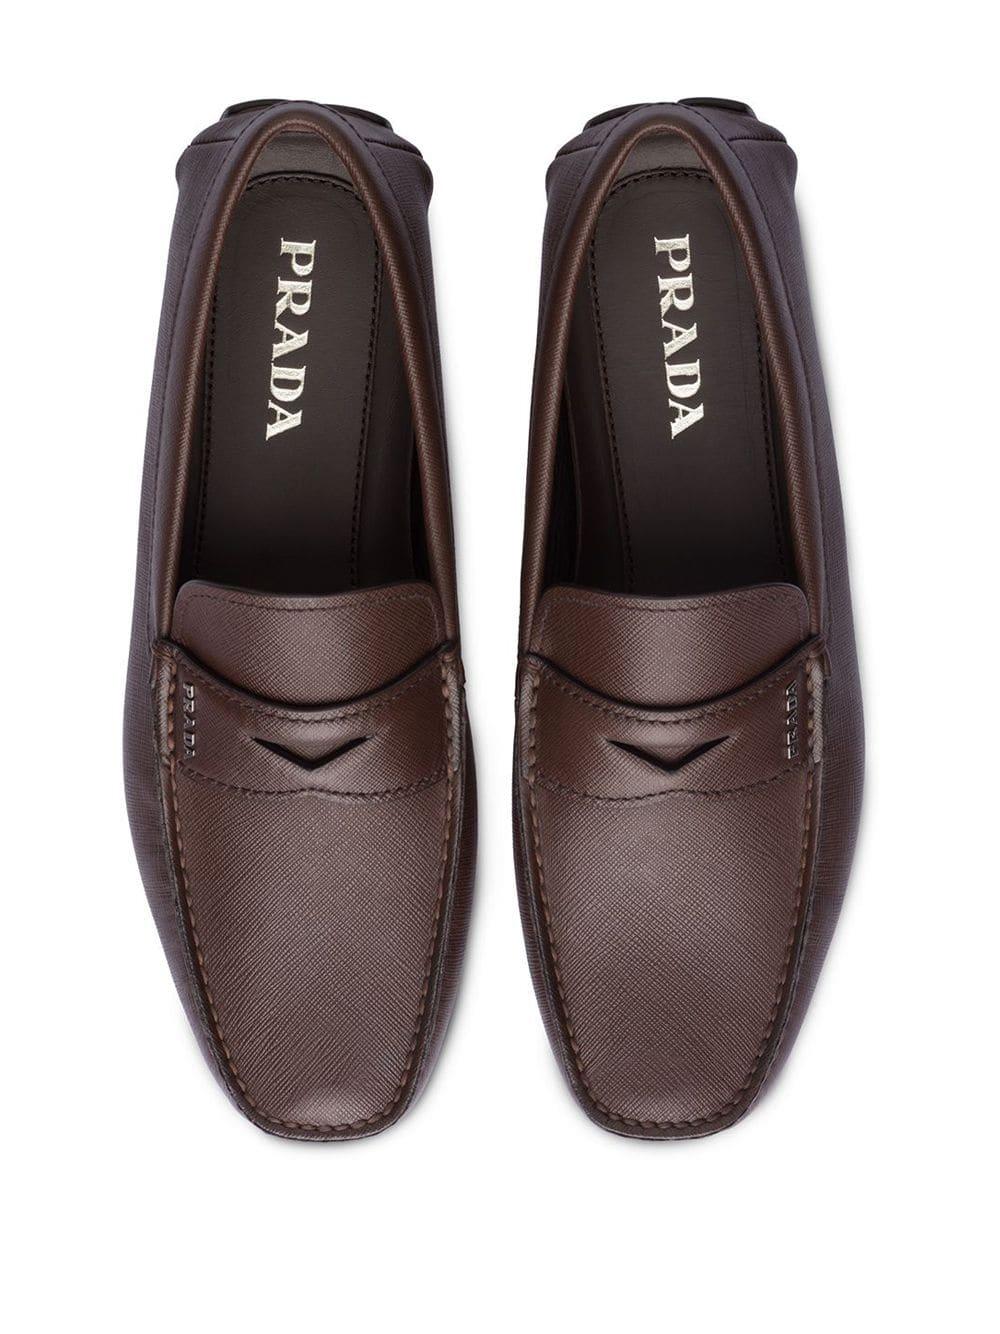 Prada Saffiano Leather Loafers in Brown for Men | Lyst